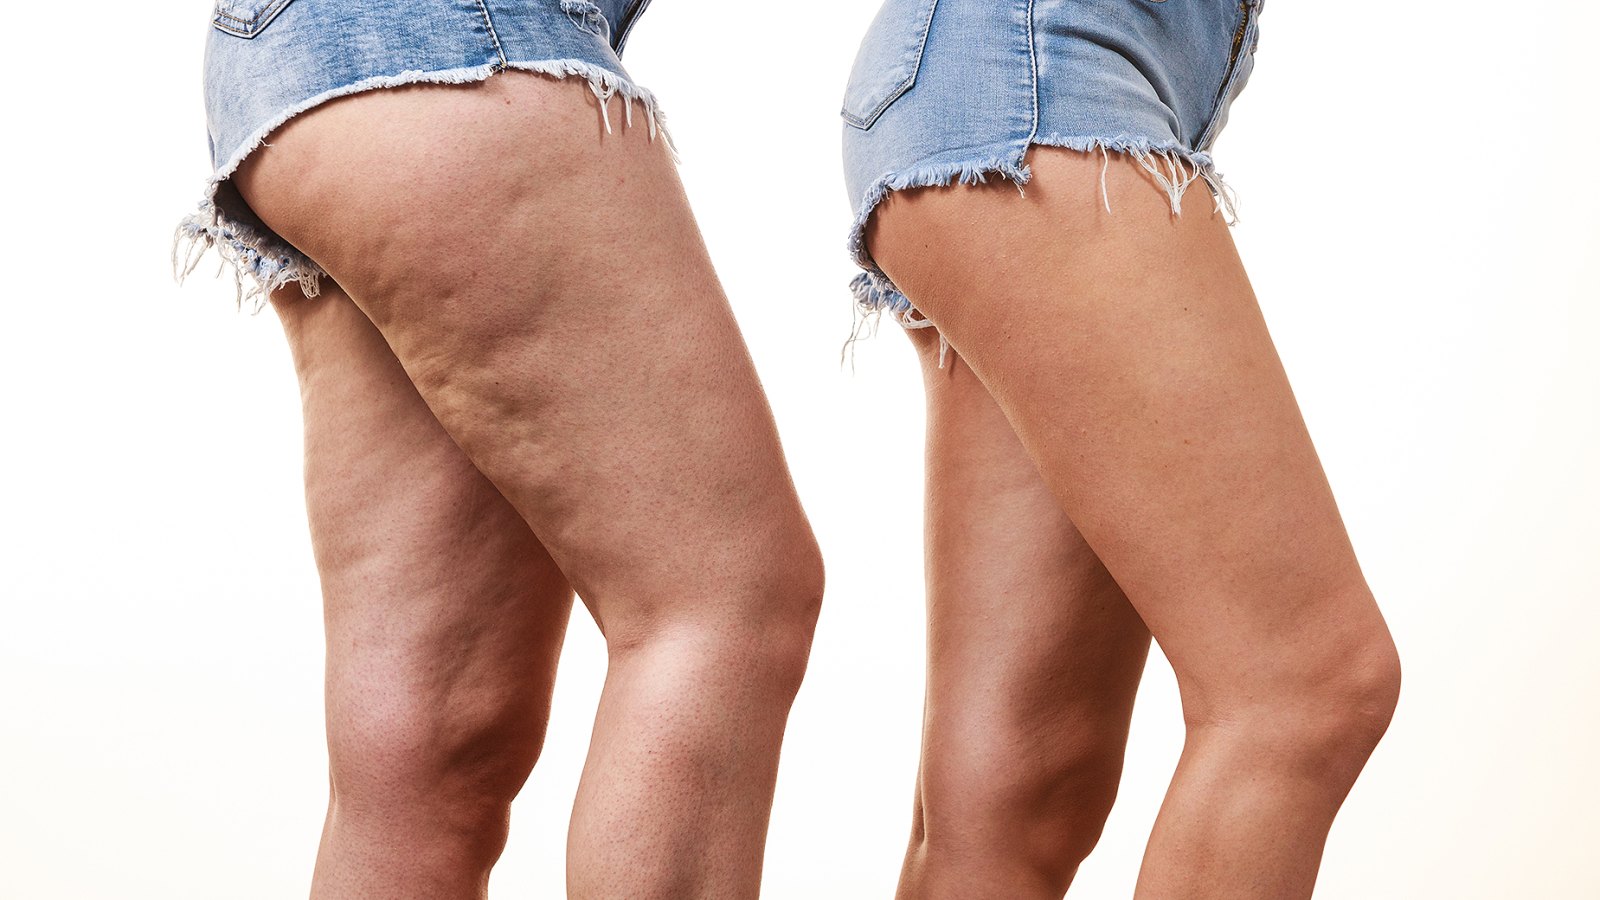 Best anti-cellulite cream for 2019 - How to get rid of cellulite